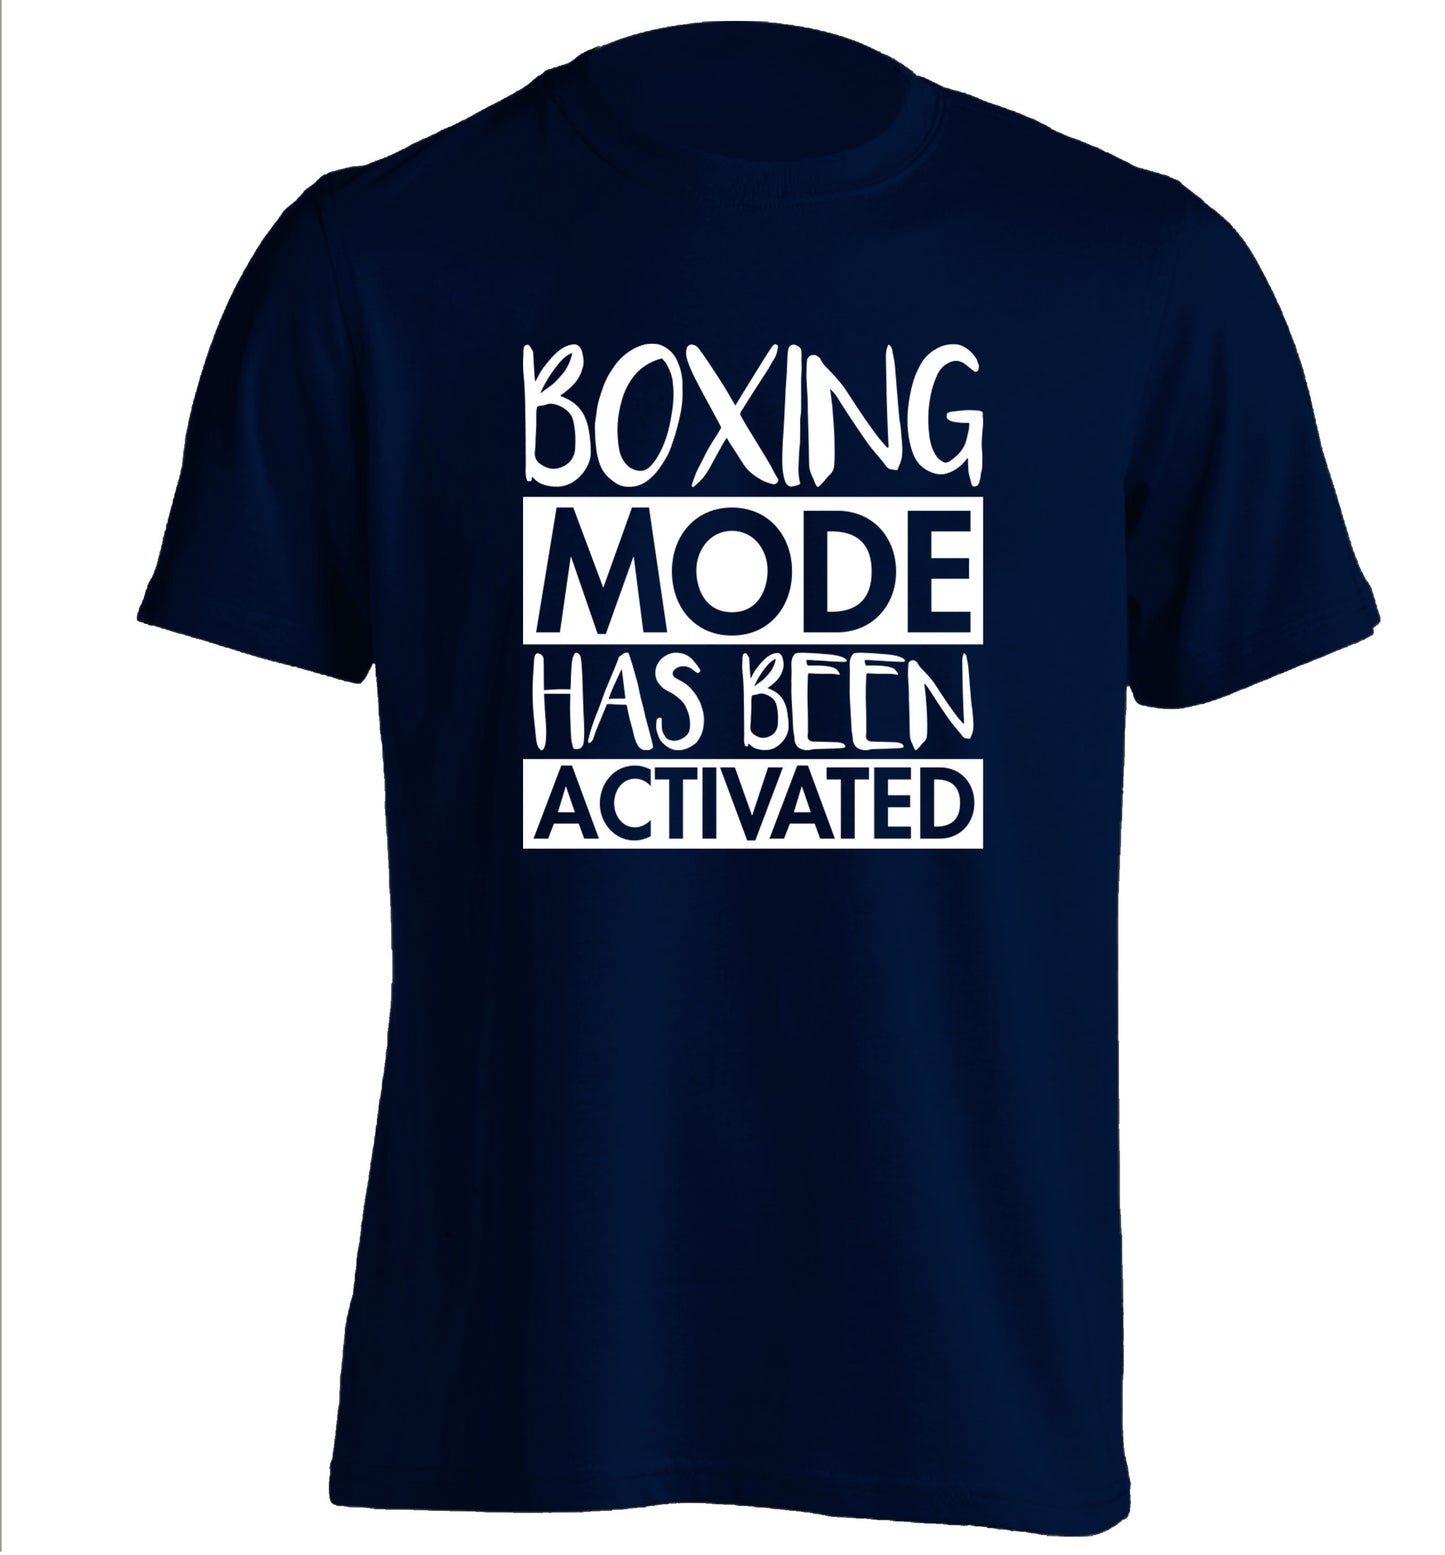 Boxing mode activated adults unisex navy Tshirt 2XL